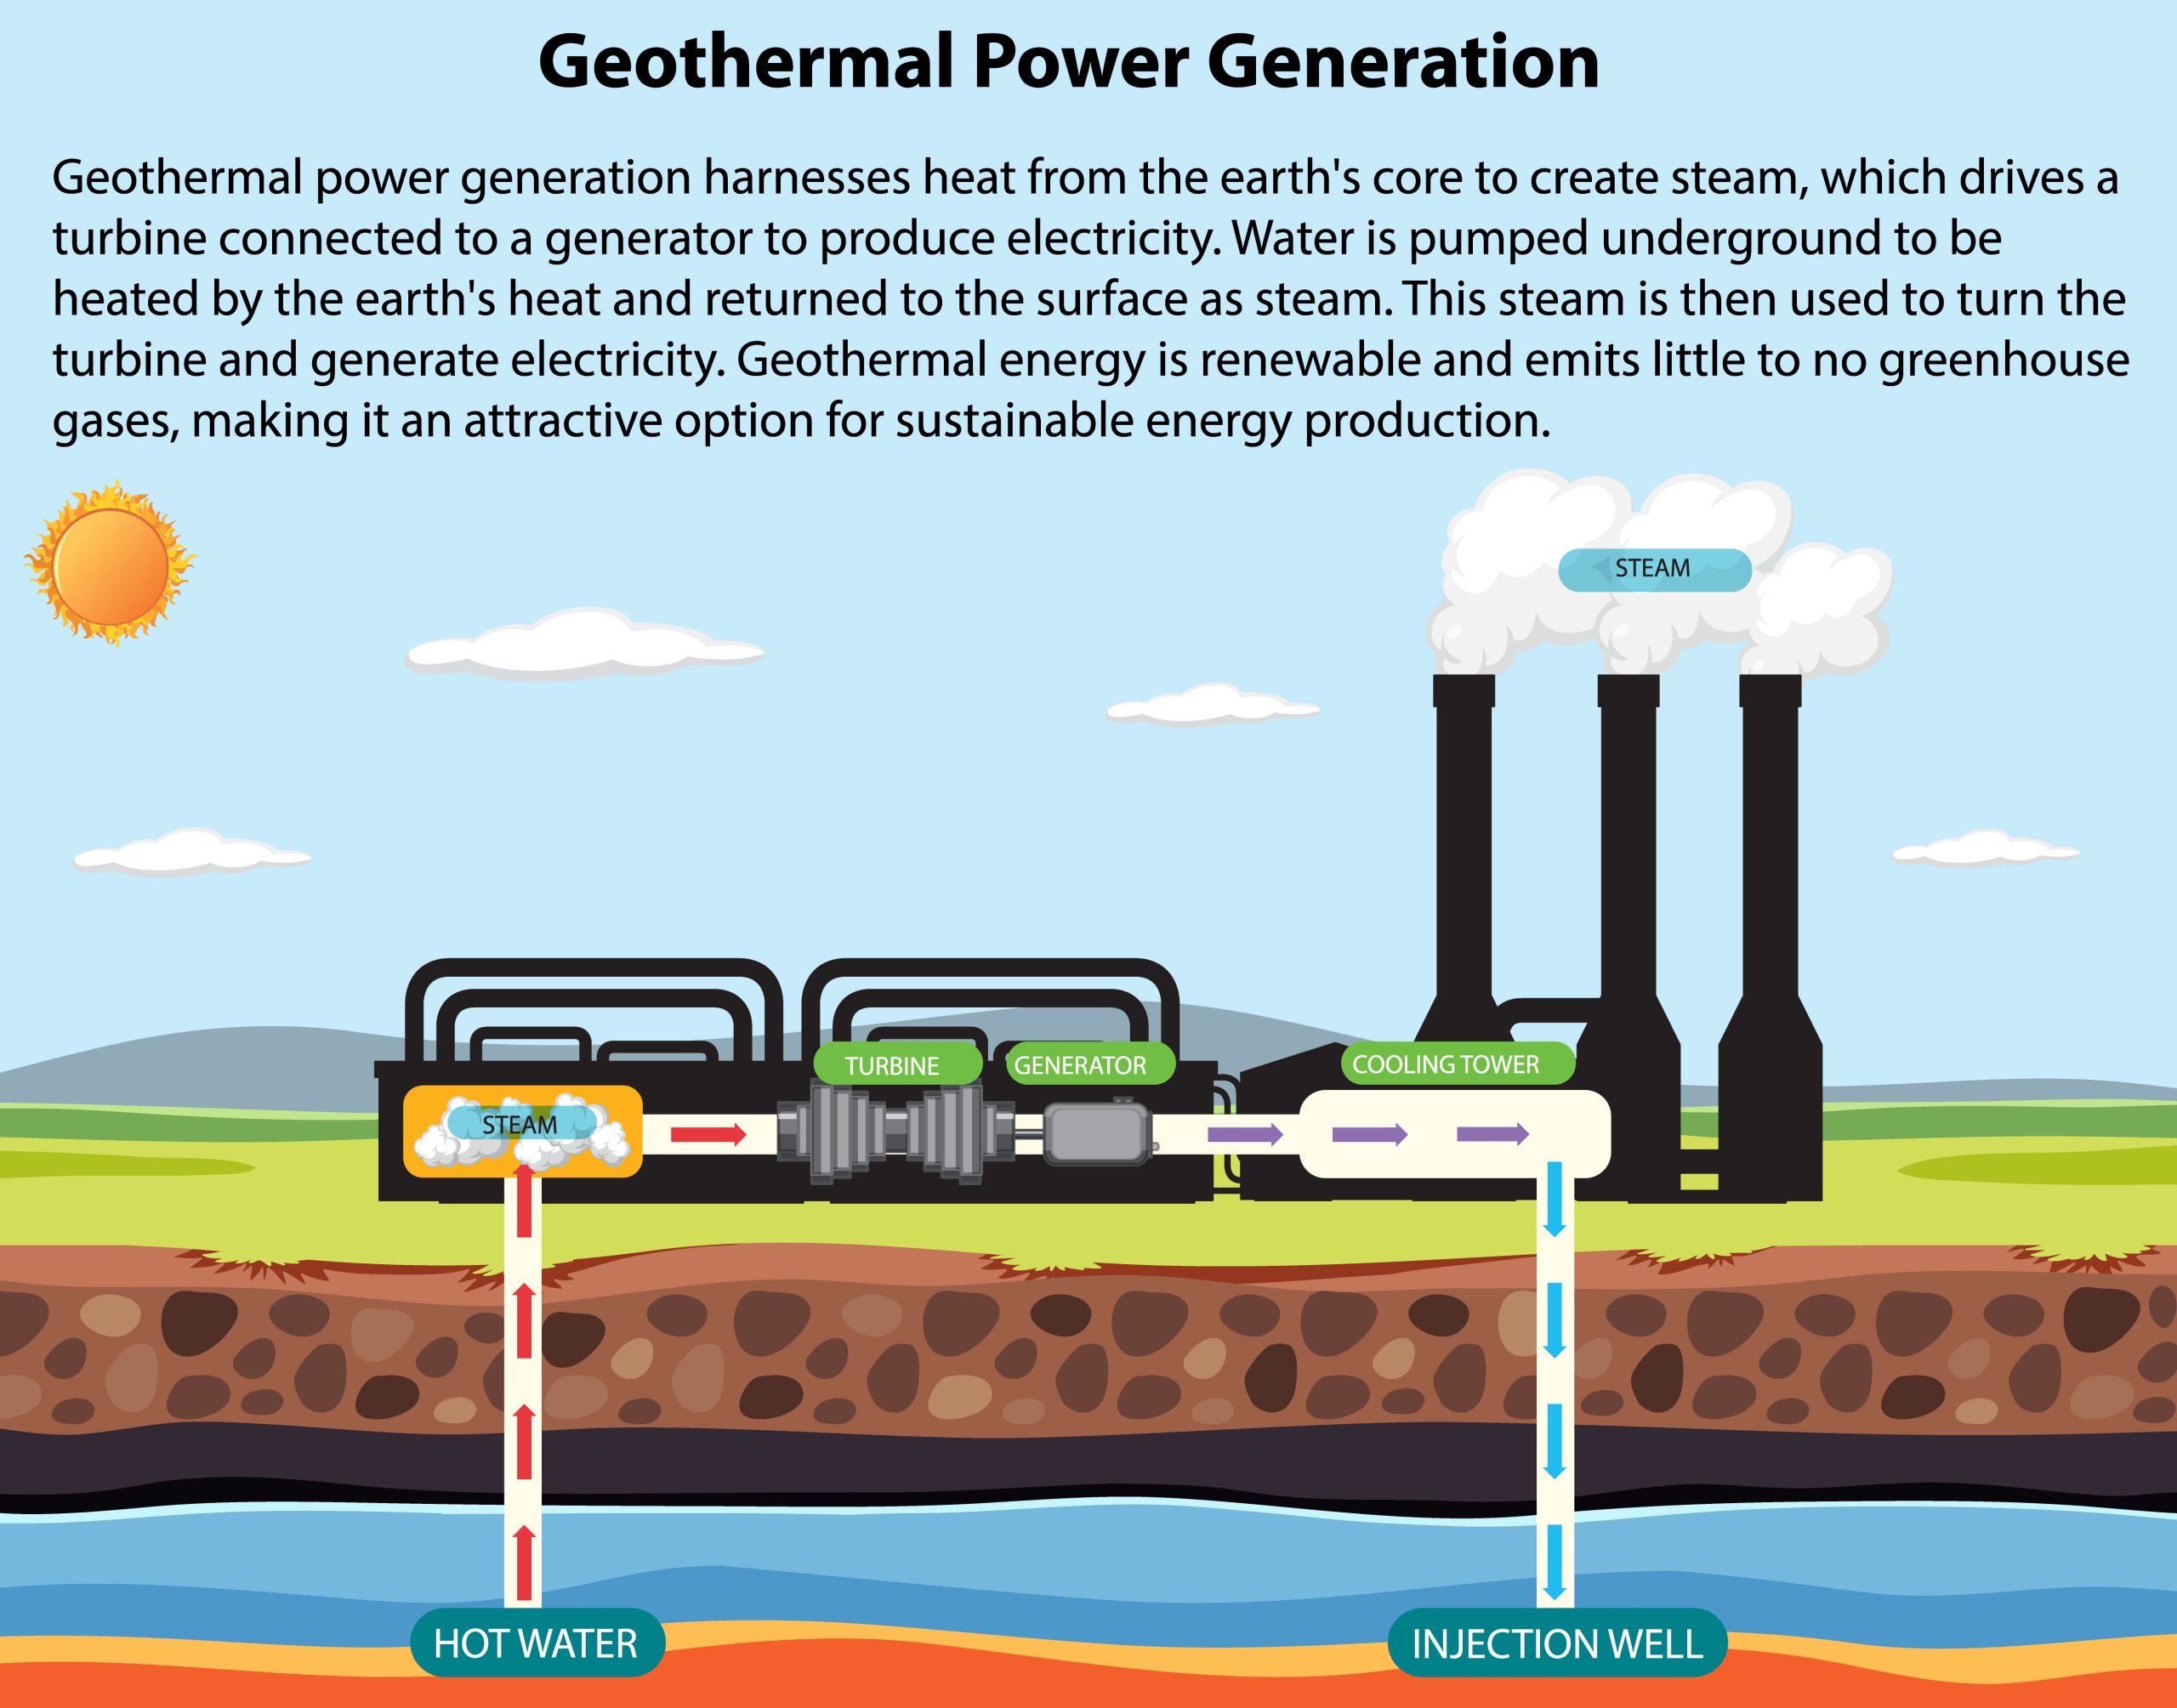 Geothermal Power Generation Infographic illustration